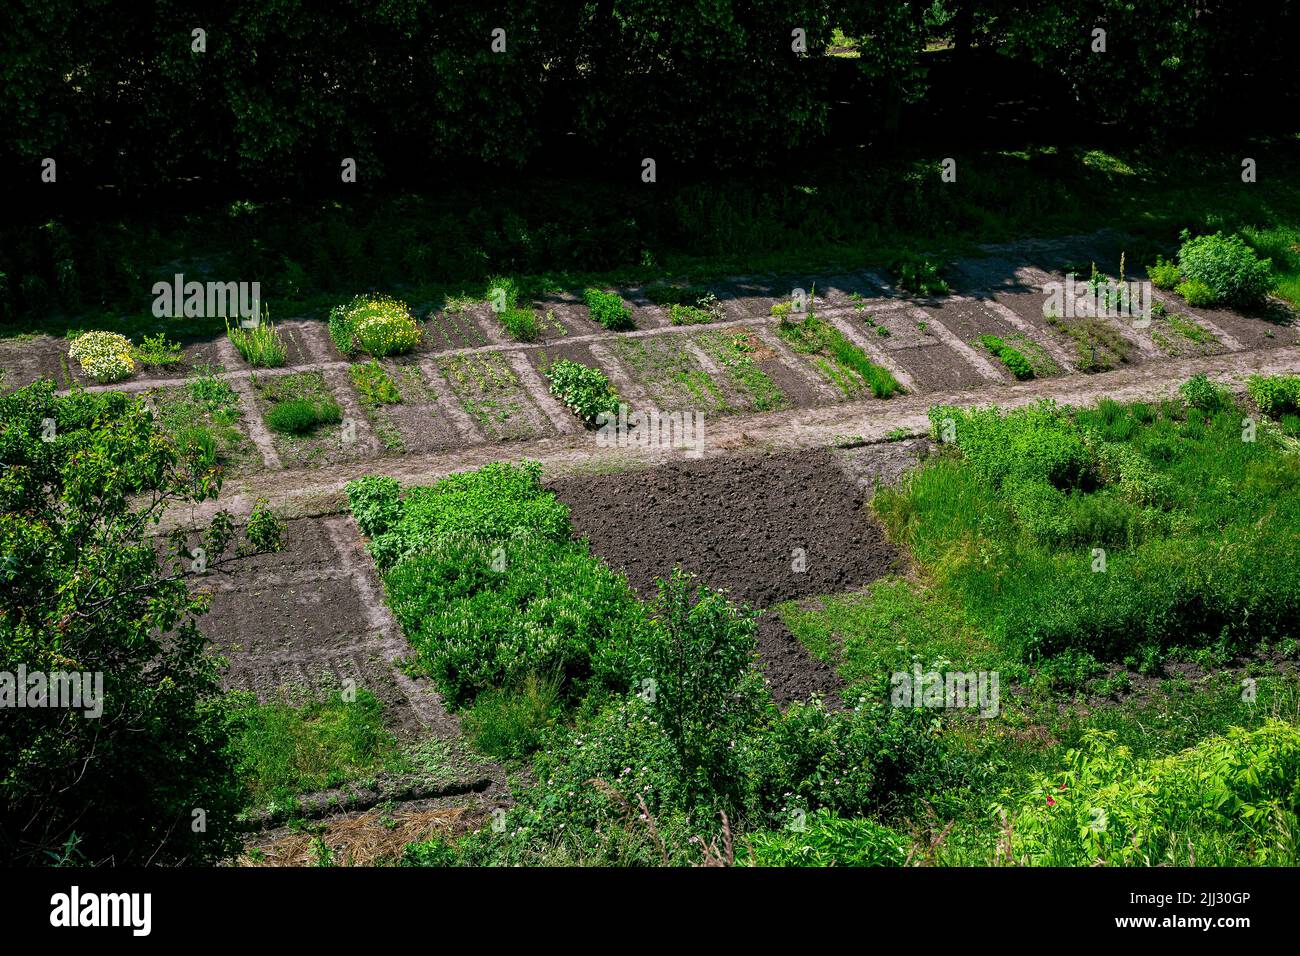 botanical garden bed with bushes and flowers for experimental cultivation and plant breeding growth of new plants, view on spring green nature with pl Stock Photo